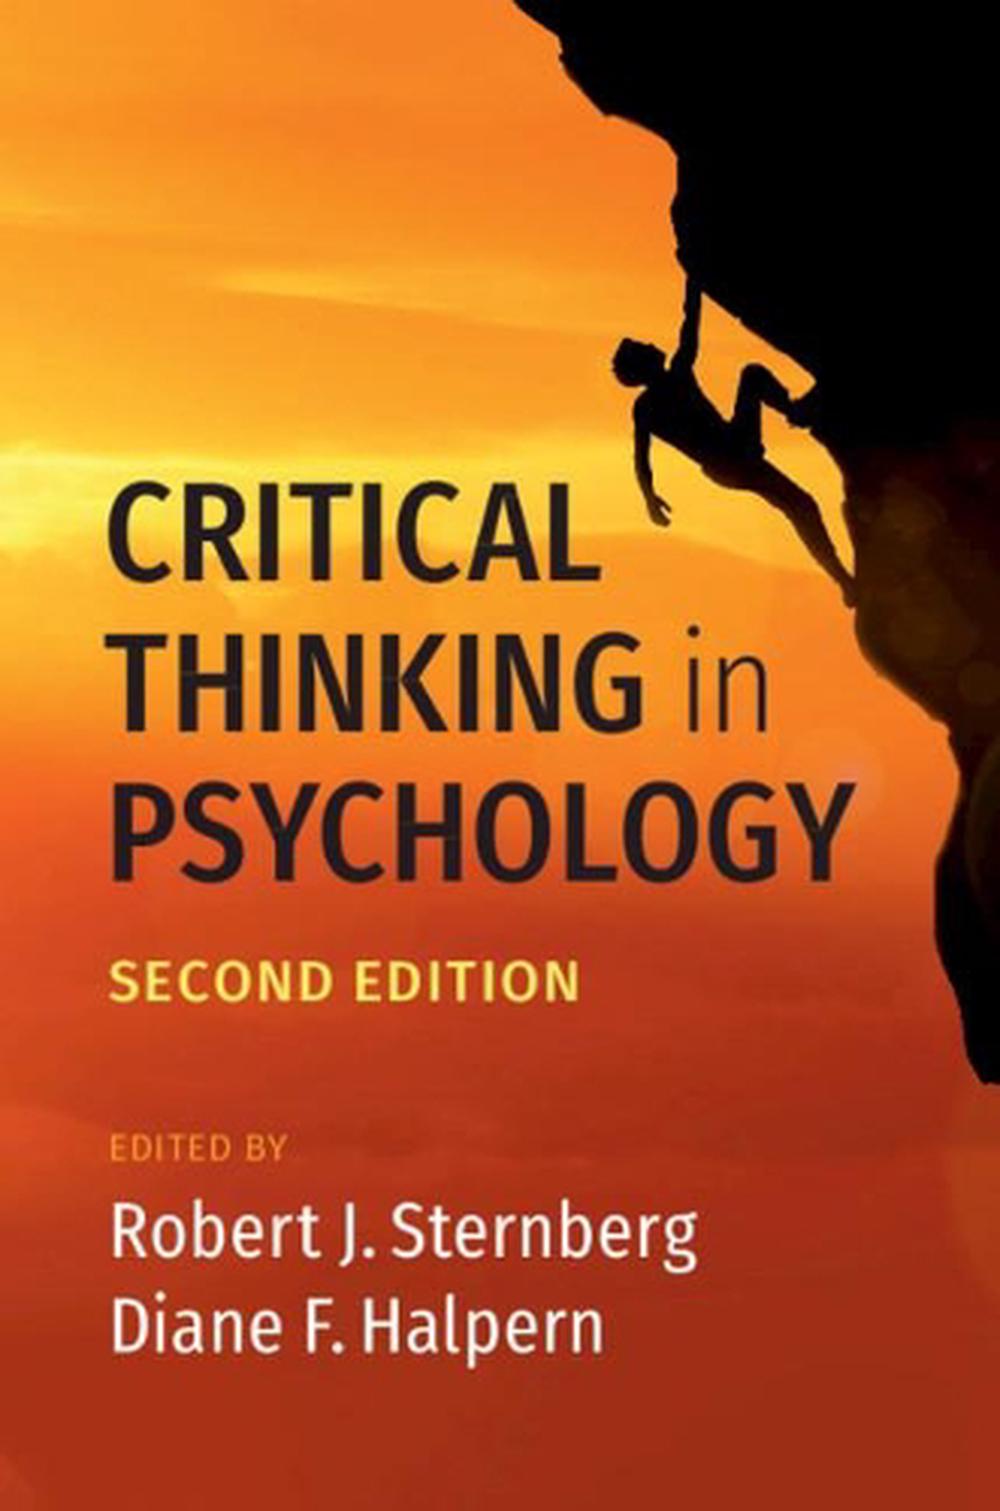 critical thinking in psychology book